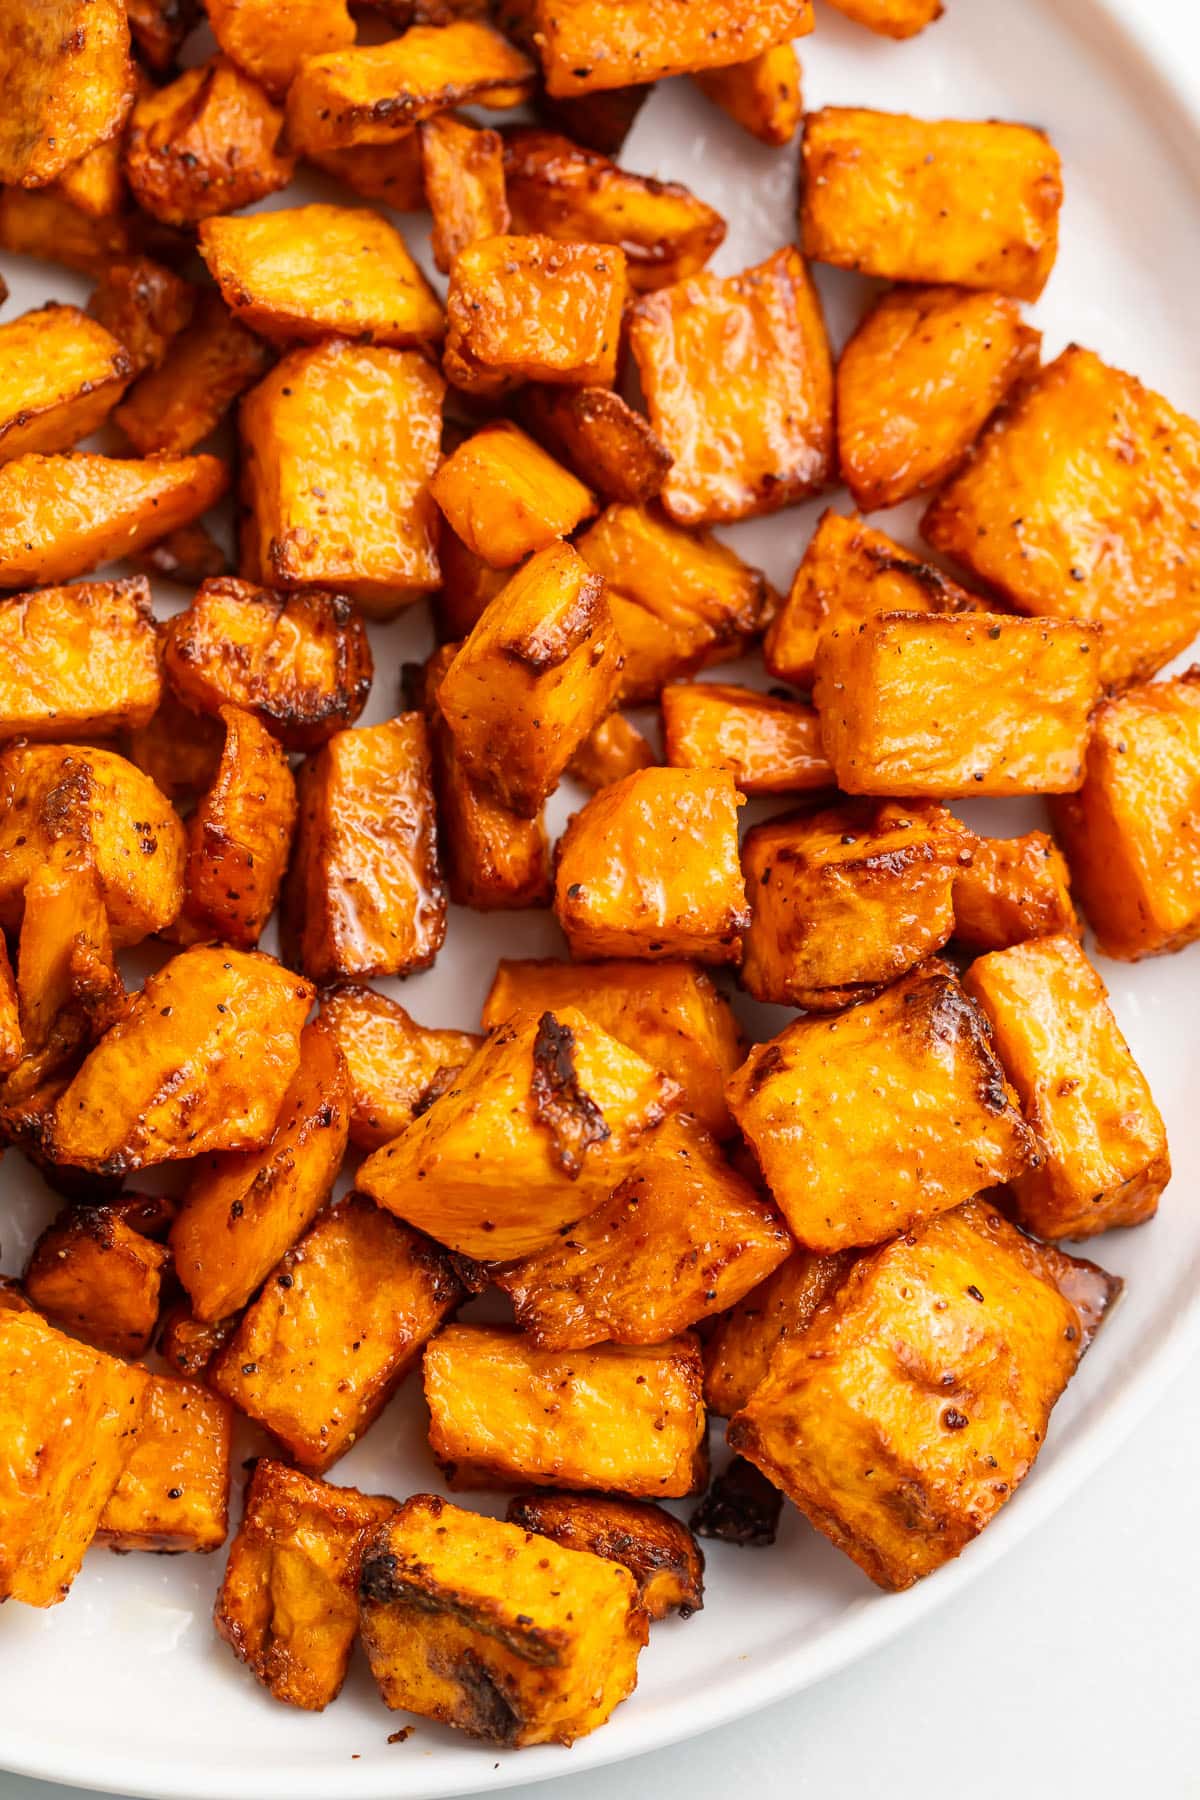 Sweet potato cubes, cooked in the air fryer, shown on a white plate.